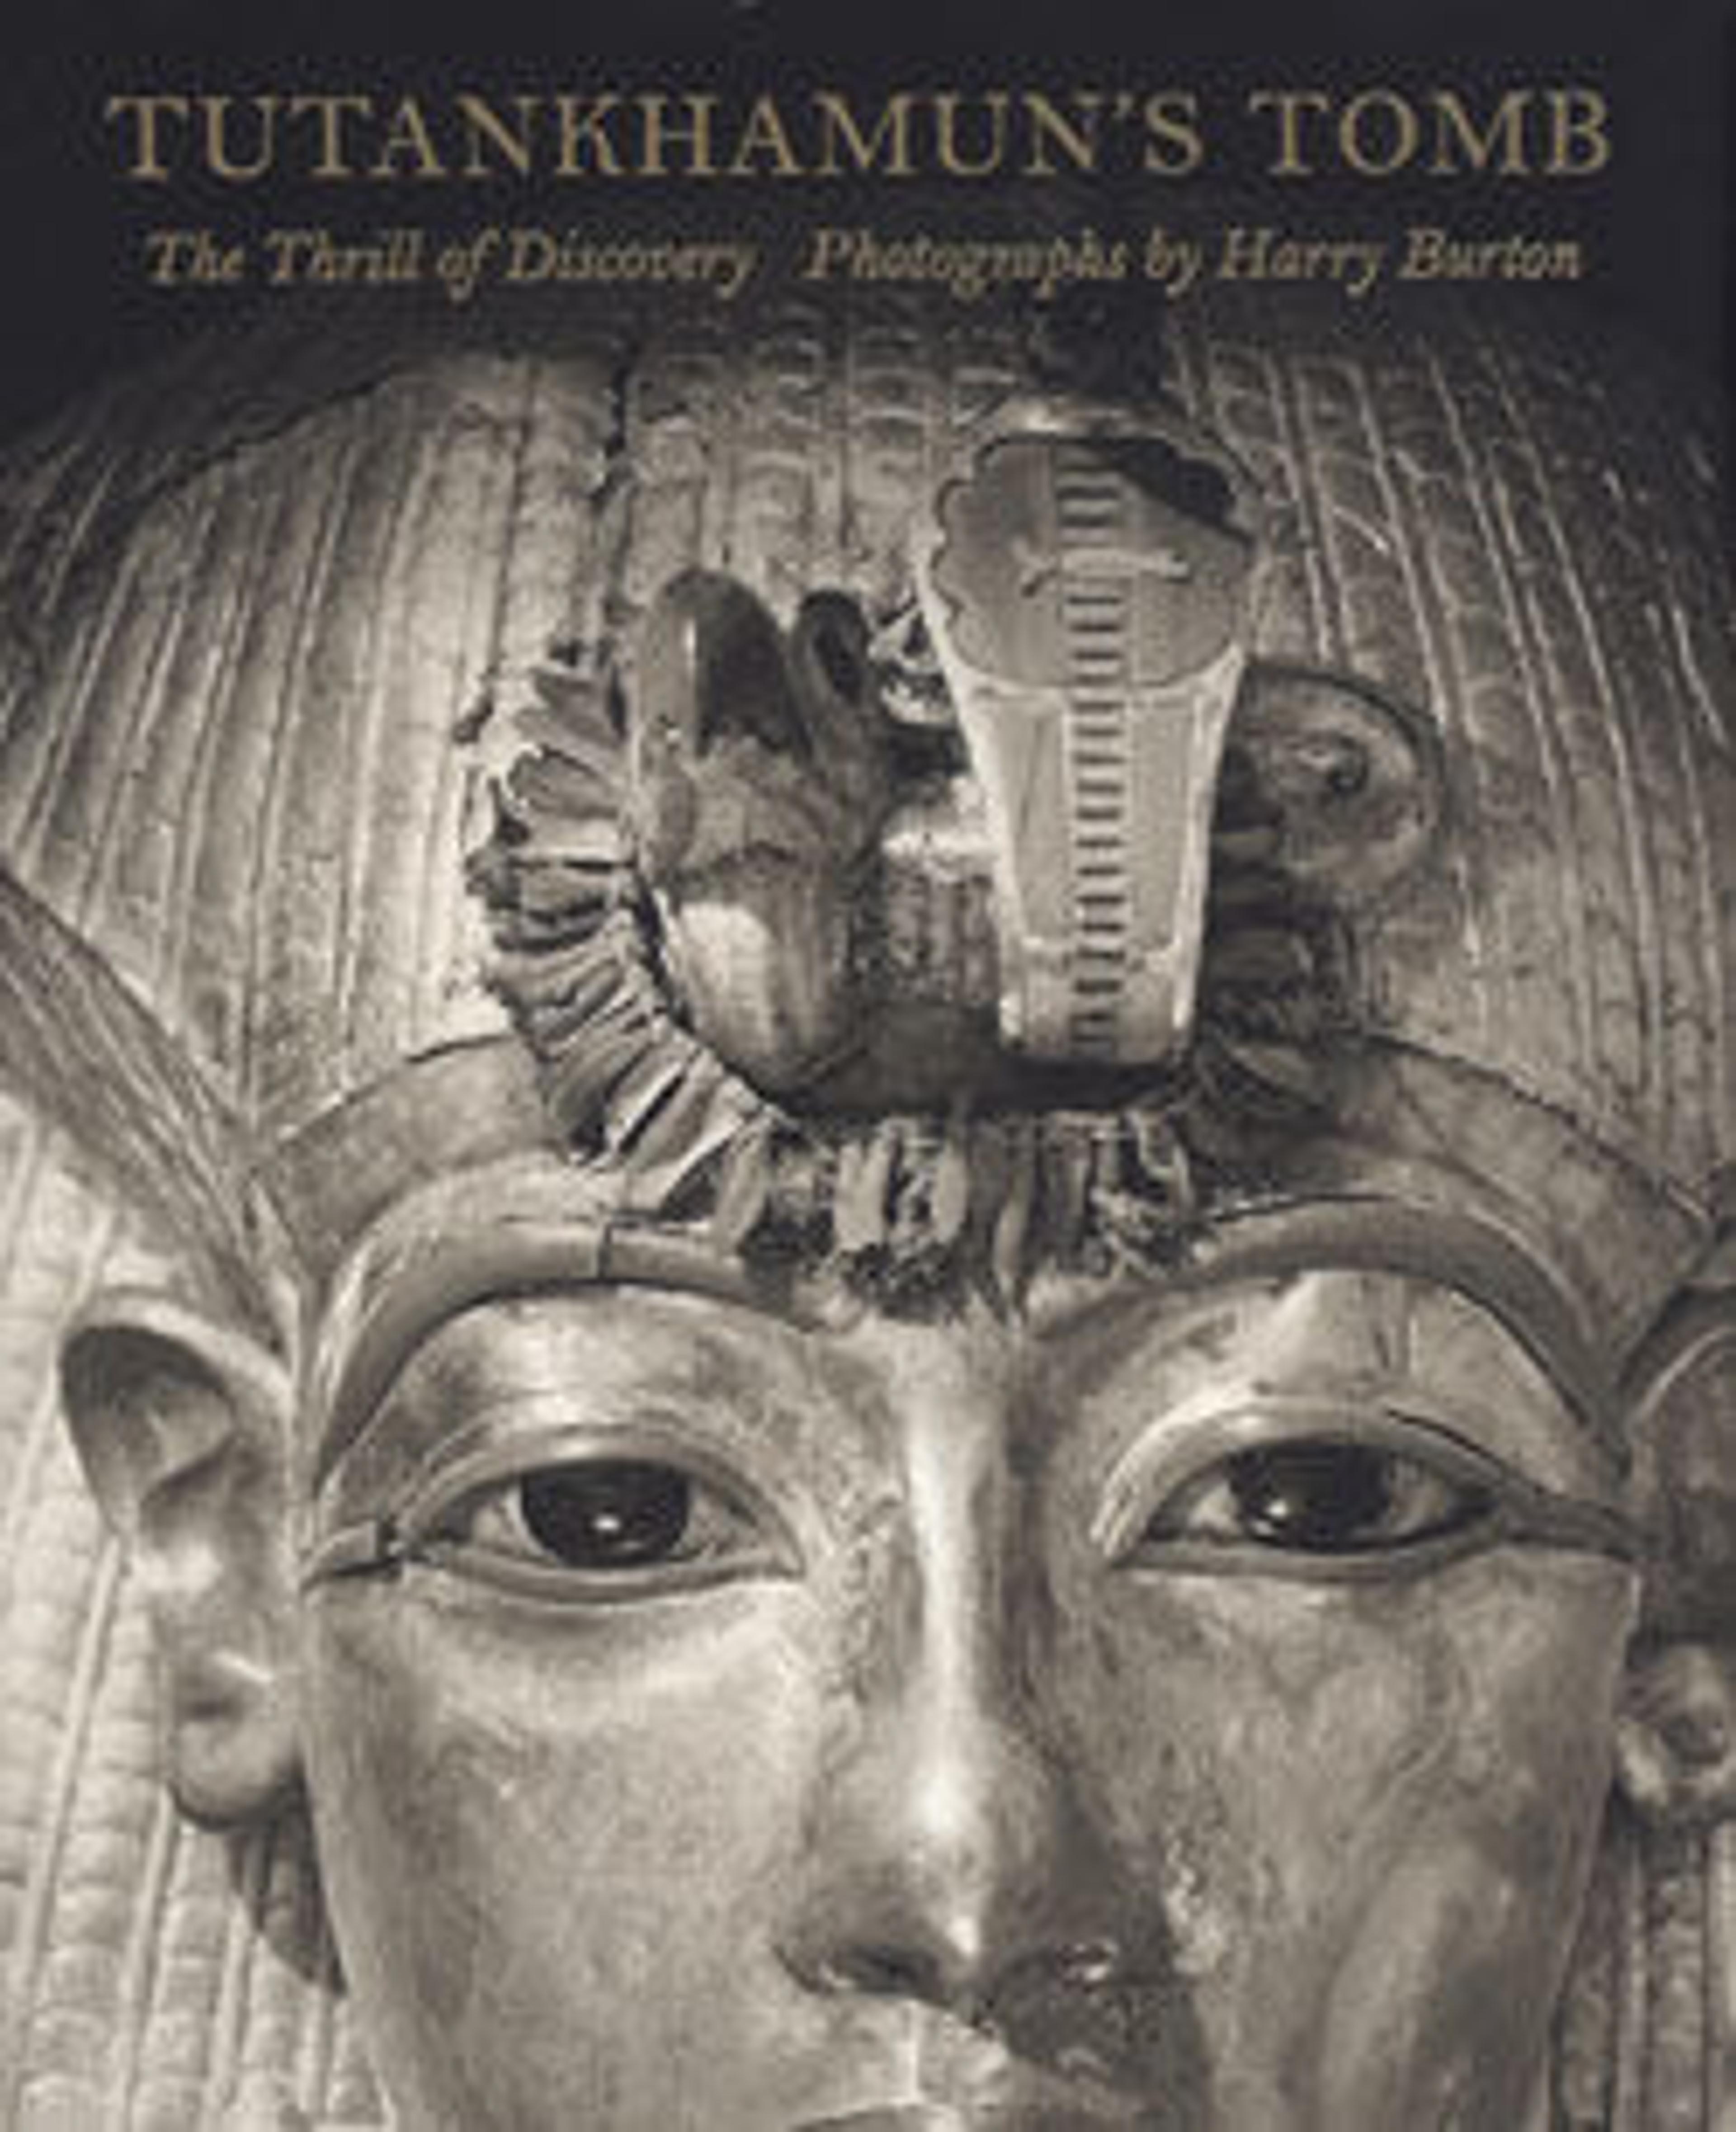 Tutankhamun's Tomb: The Thrill of Discovery